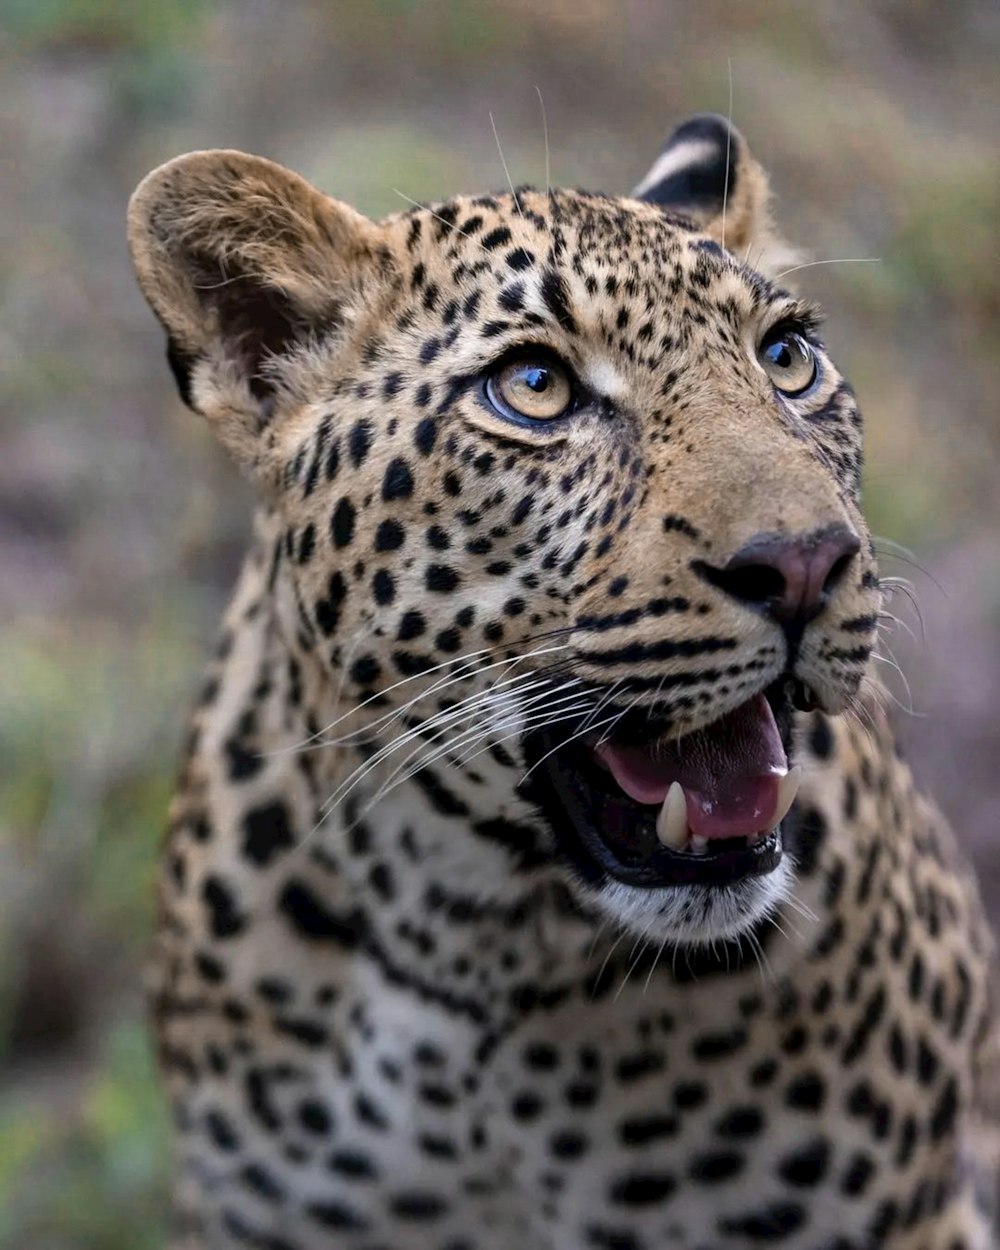 a close up of a leopard with its mouth open